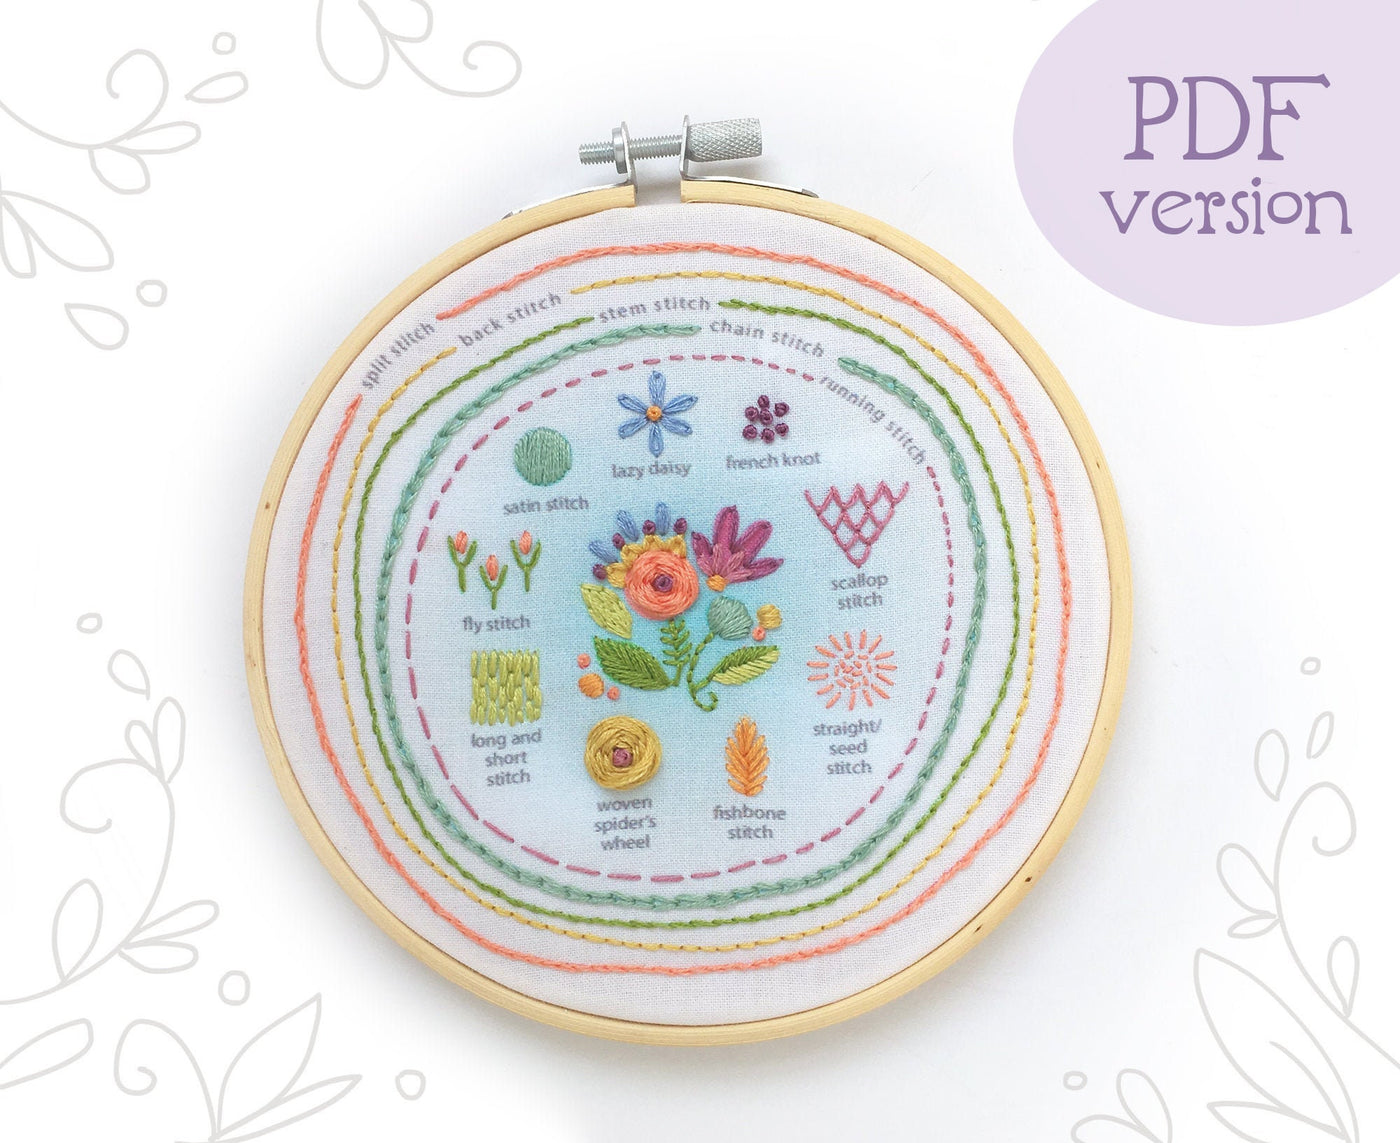 Bundle - Stitch Sampler Embroidery Patterns with Instructions